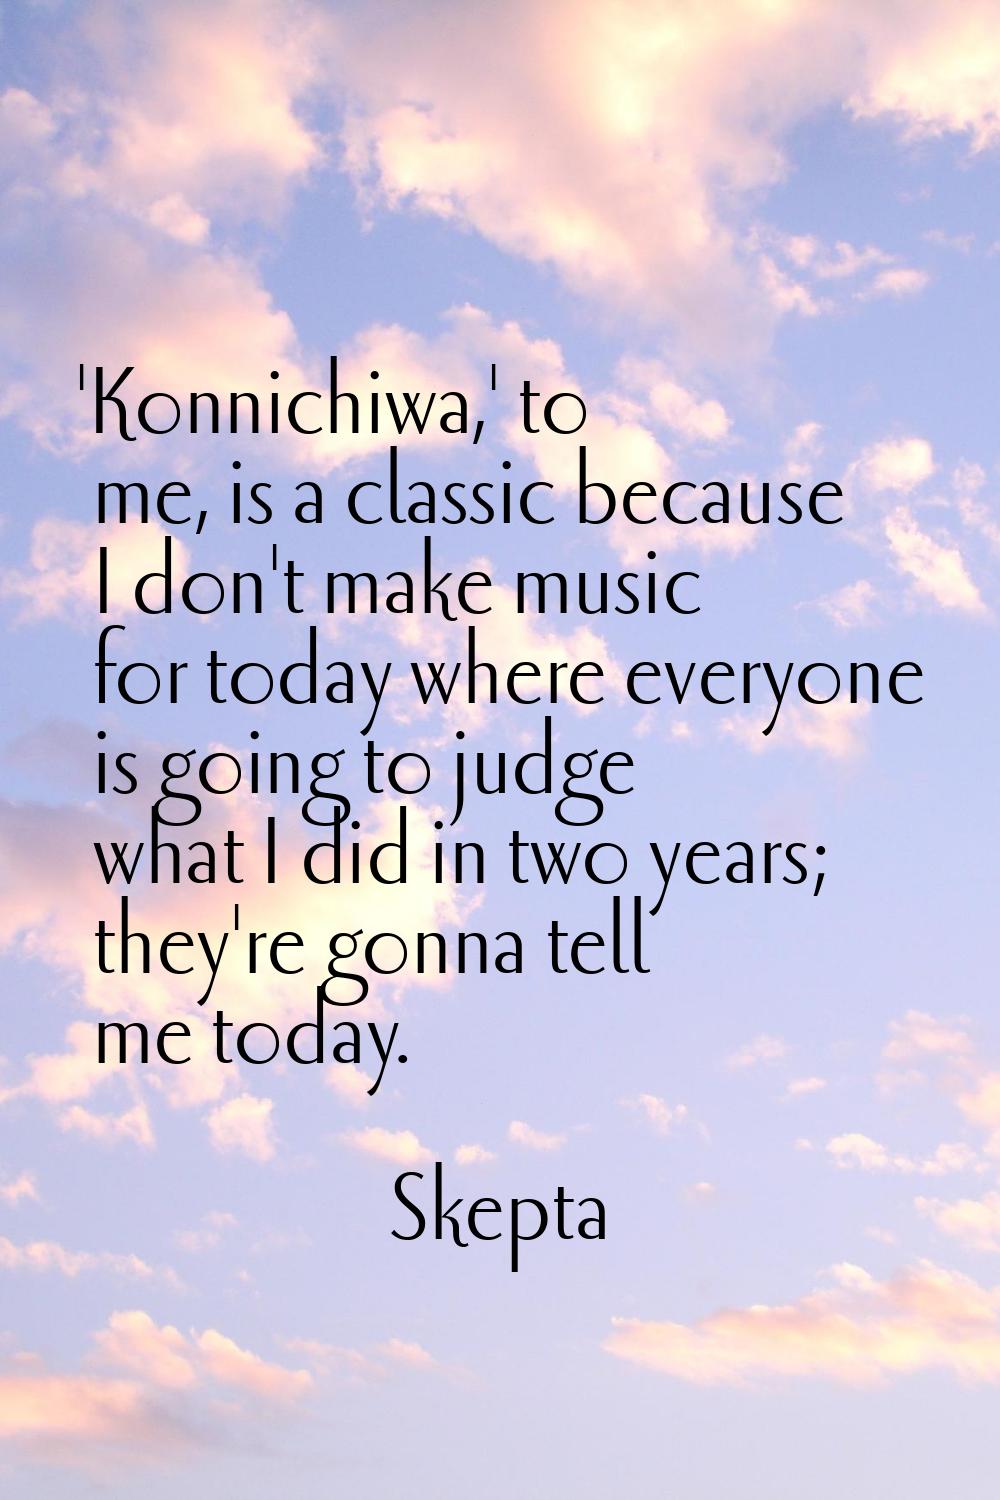 'Konnichiwa,' to me, is a classic because I don't make music for today where everyone is going to j